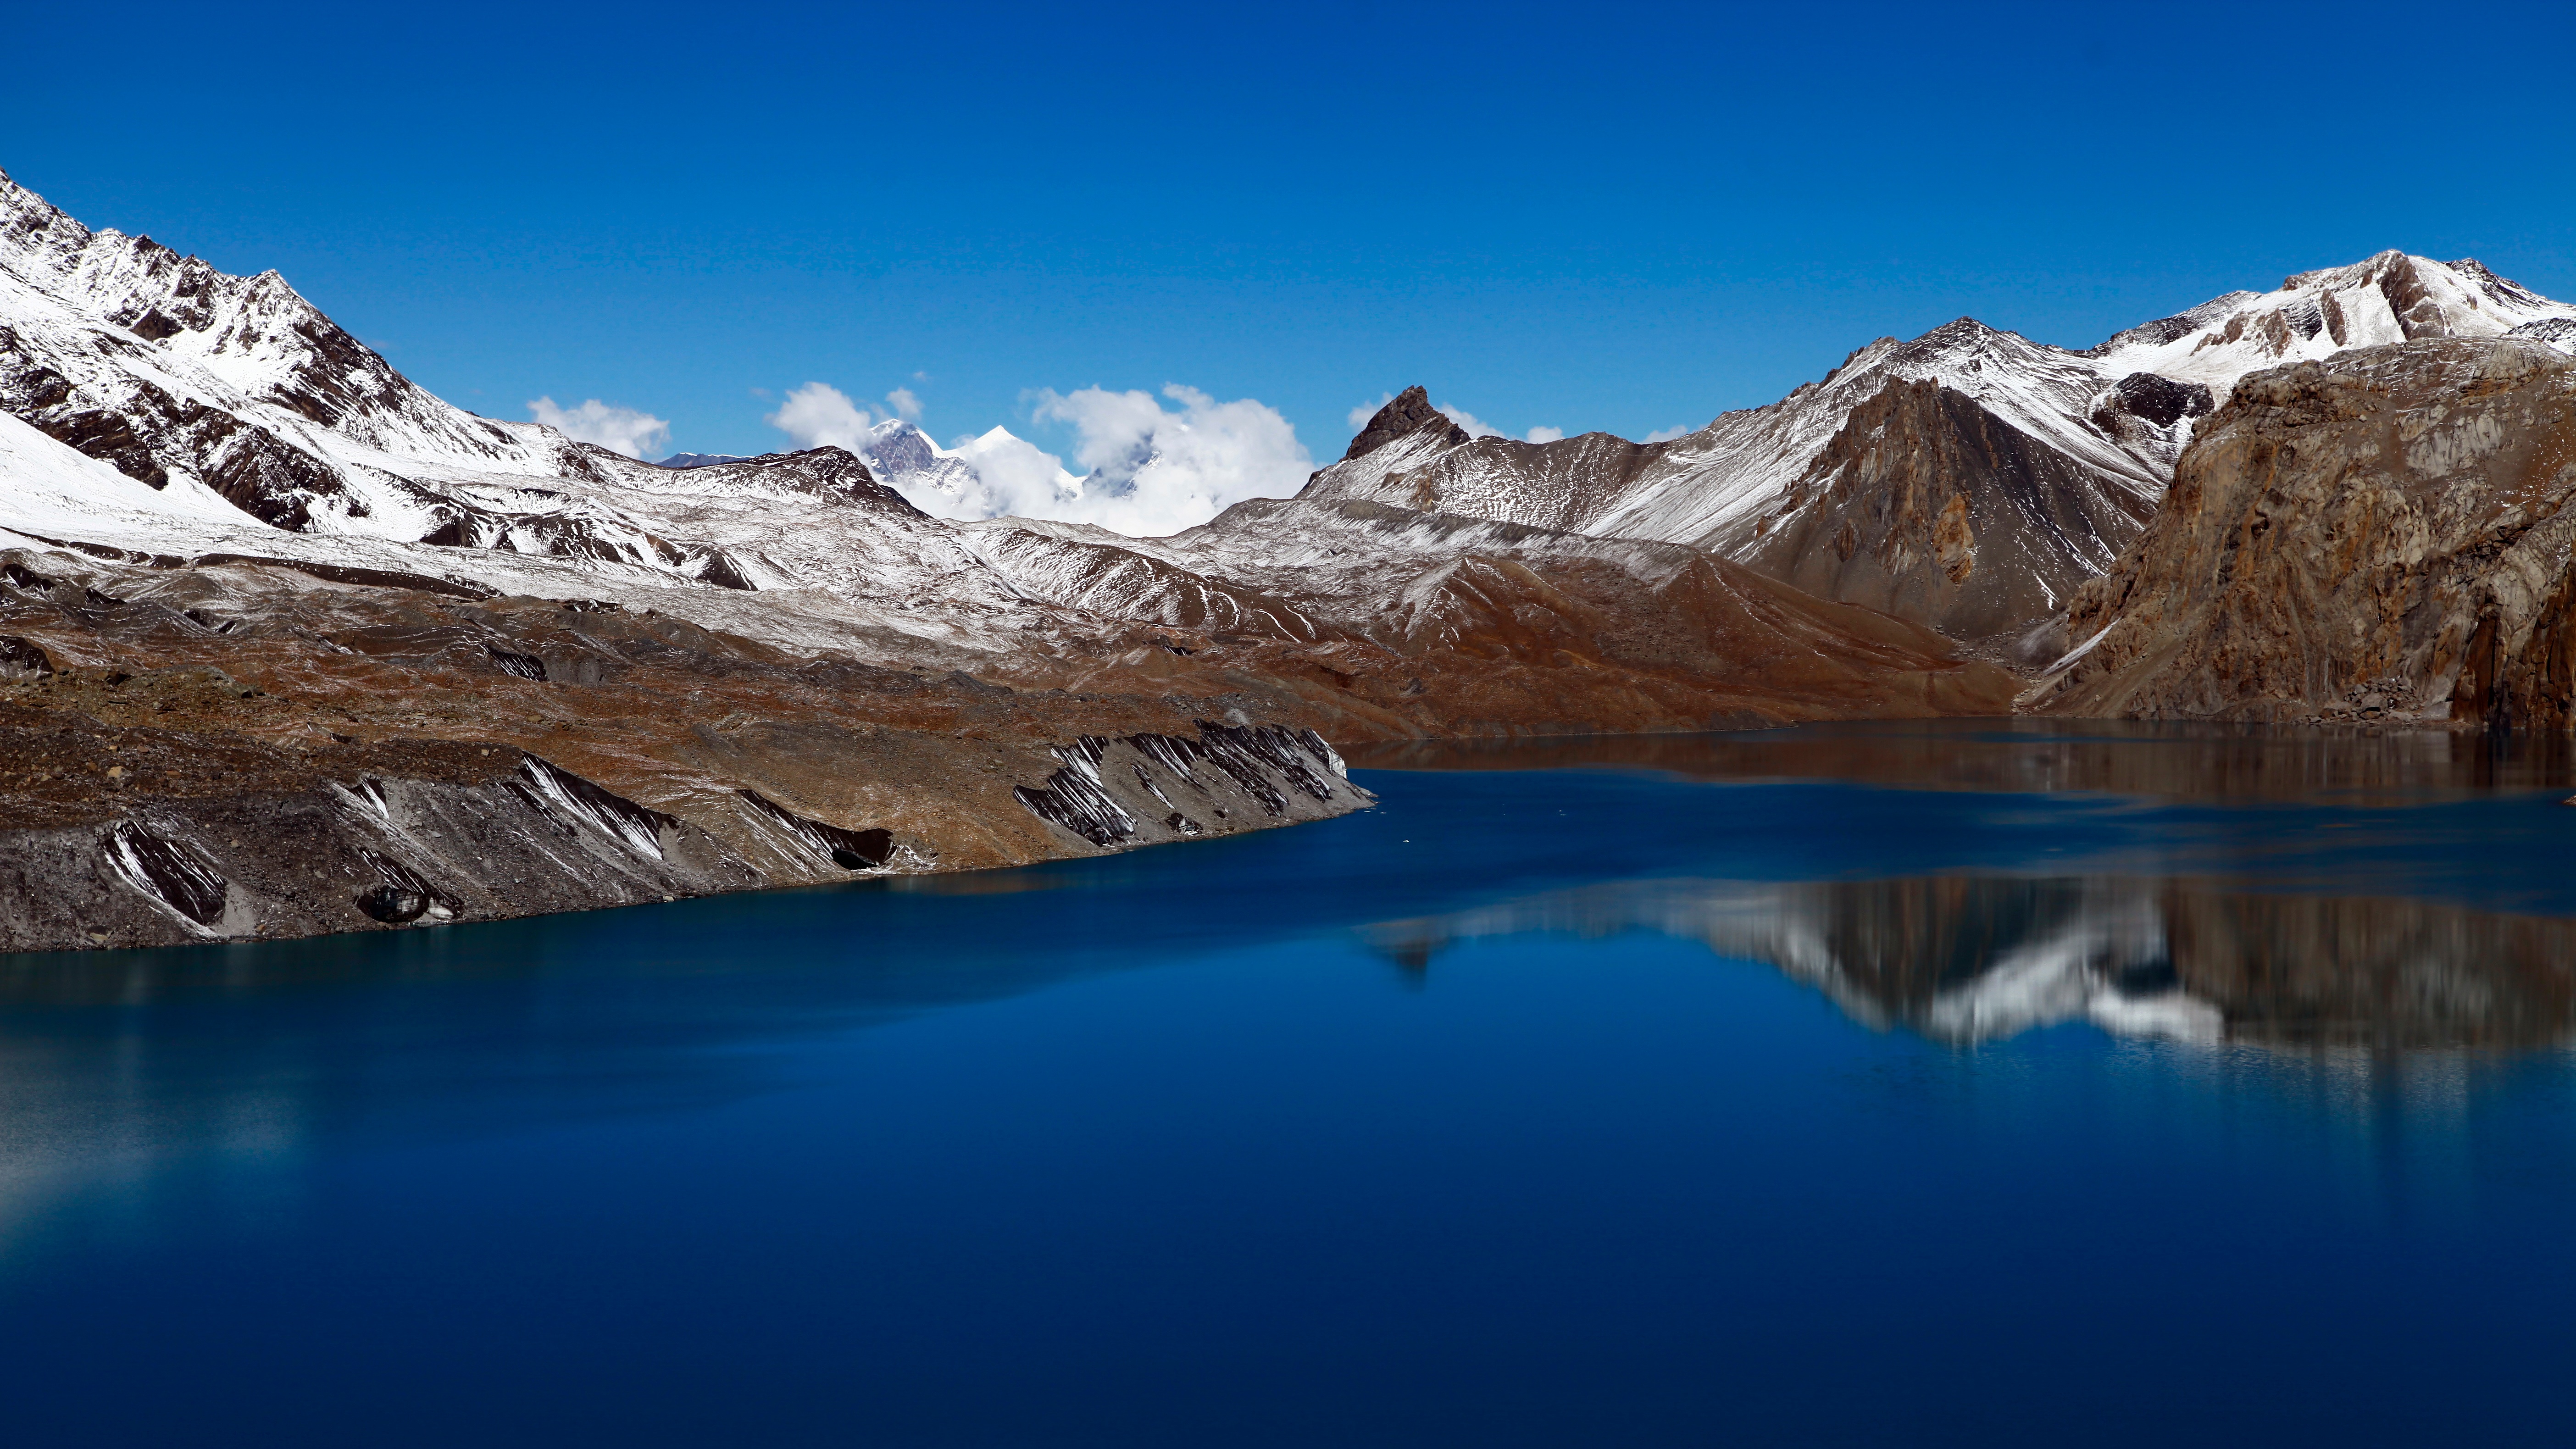 Free photo A lake among mountains with snow-capped peaks